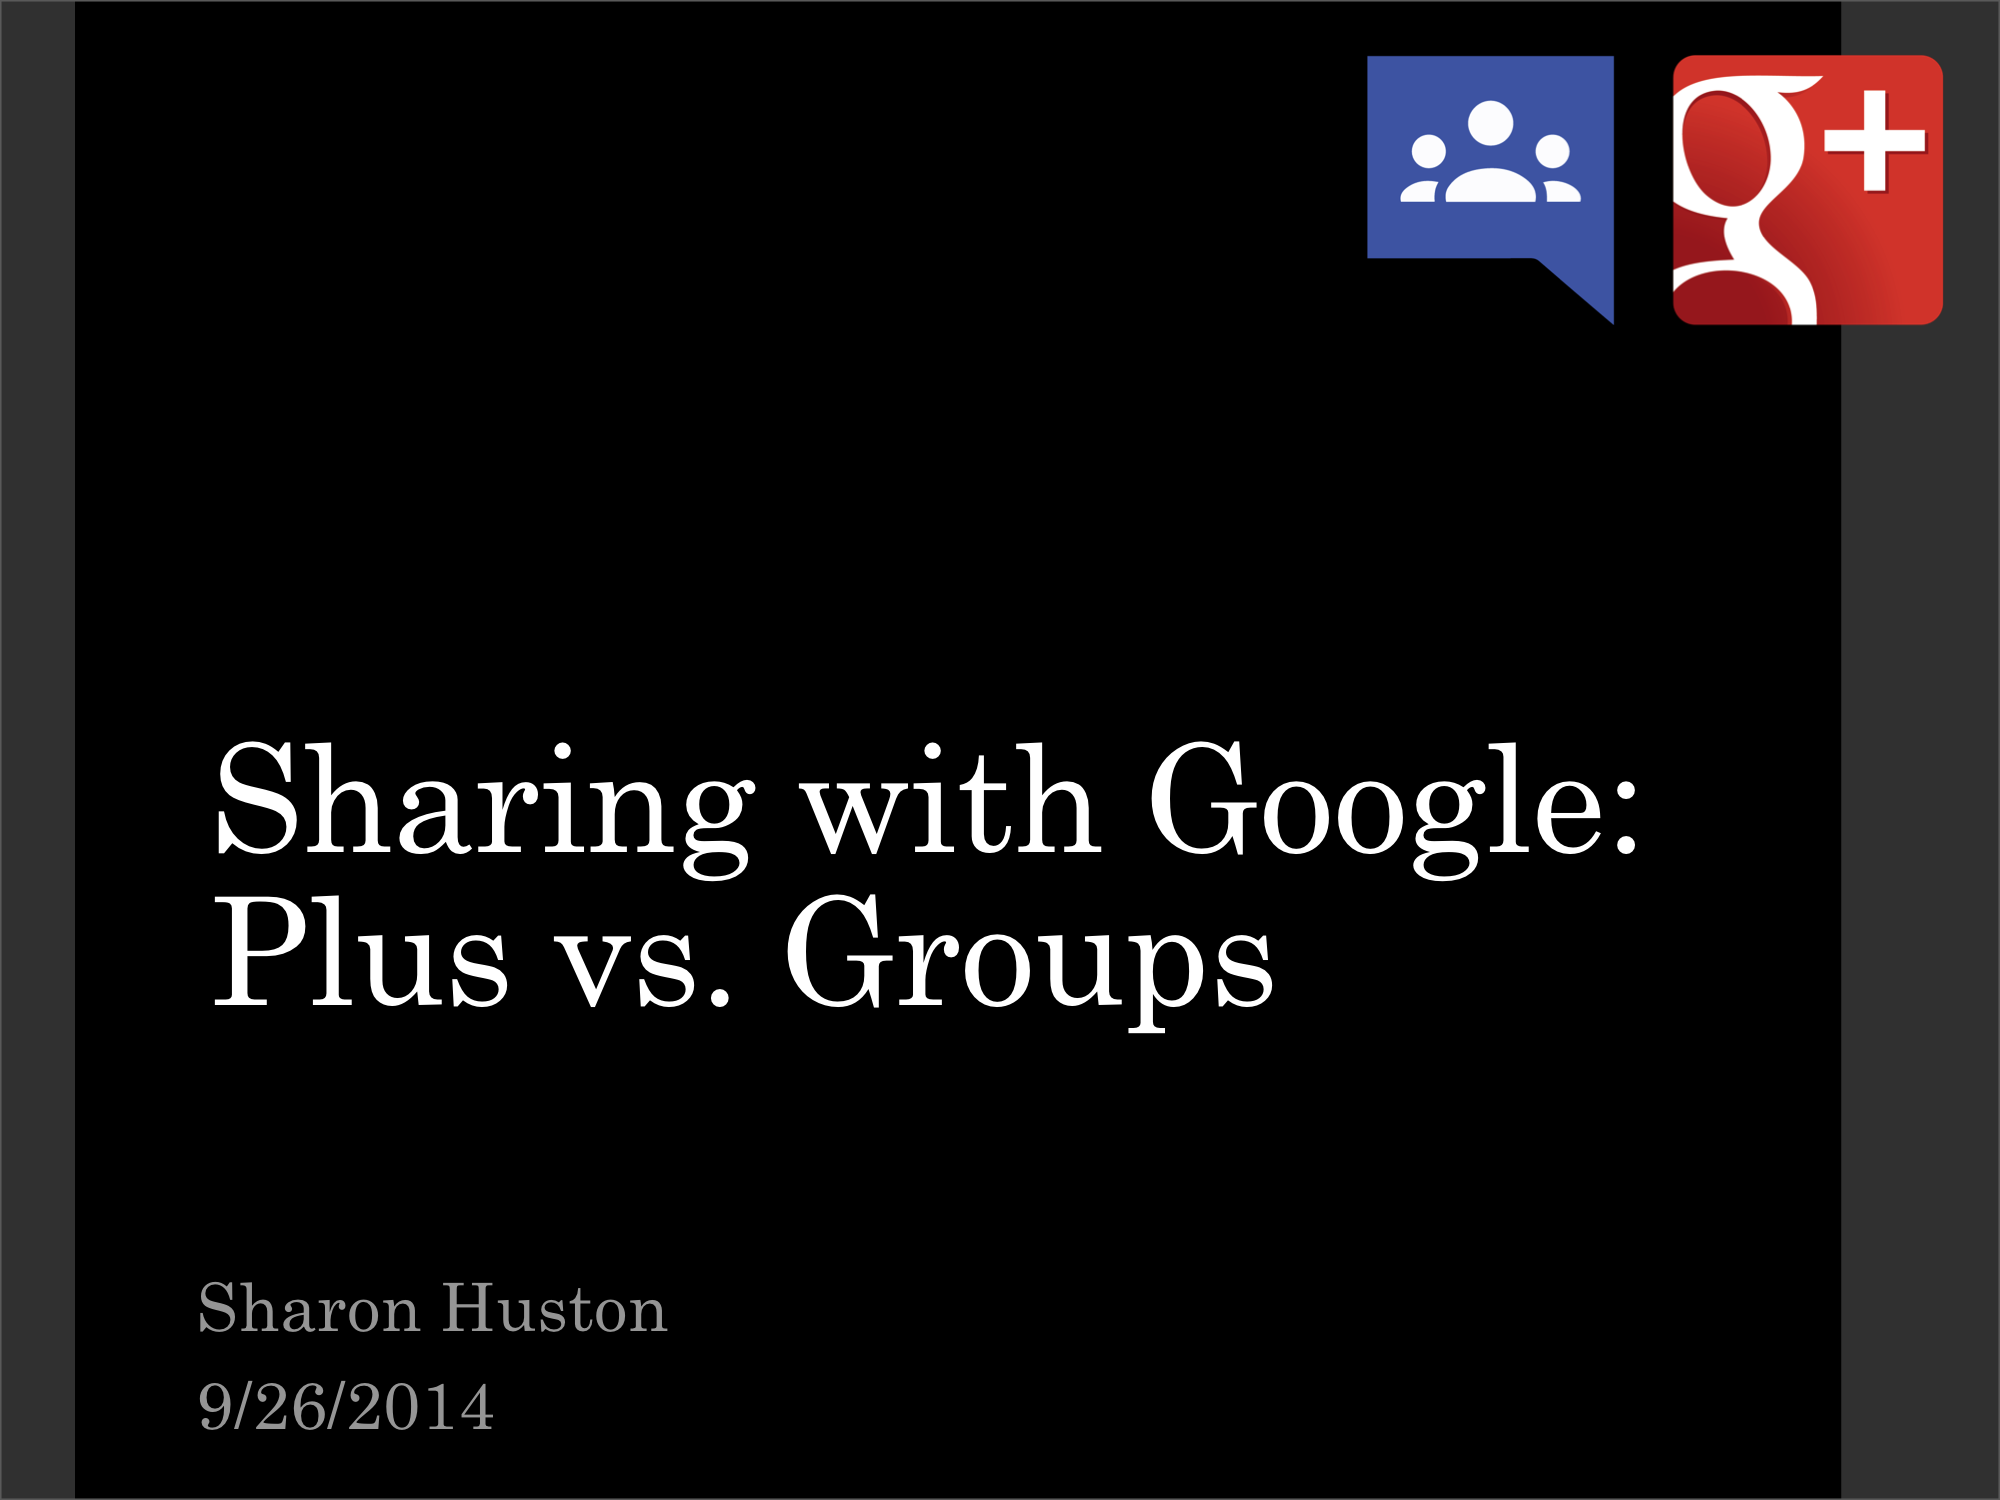 This presentation discusses the trade-offs between Google Groups and Google Plus Communities.